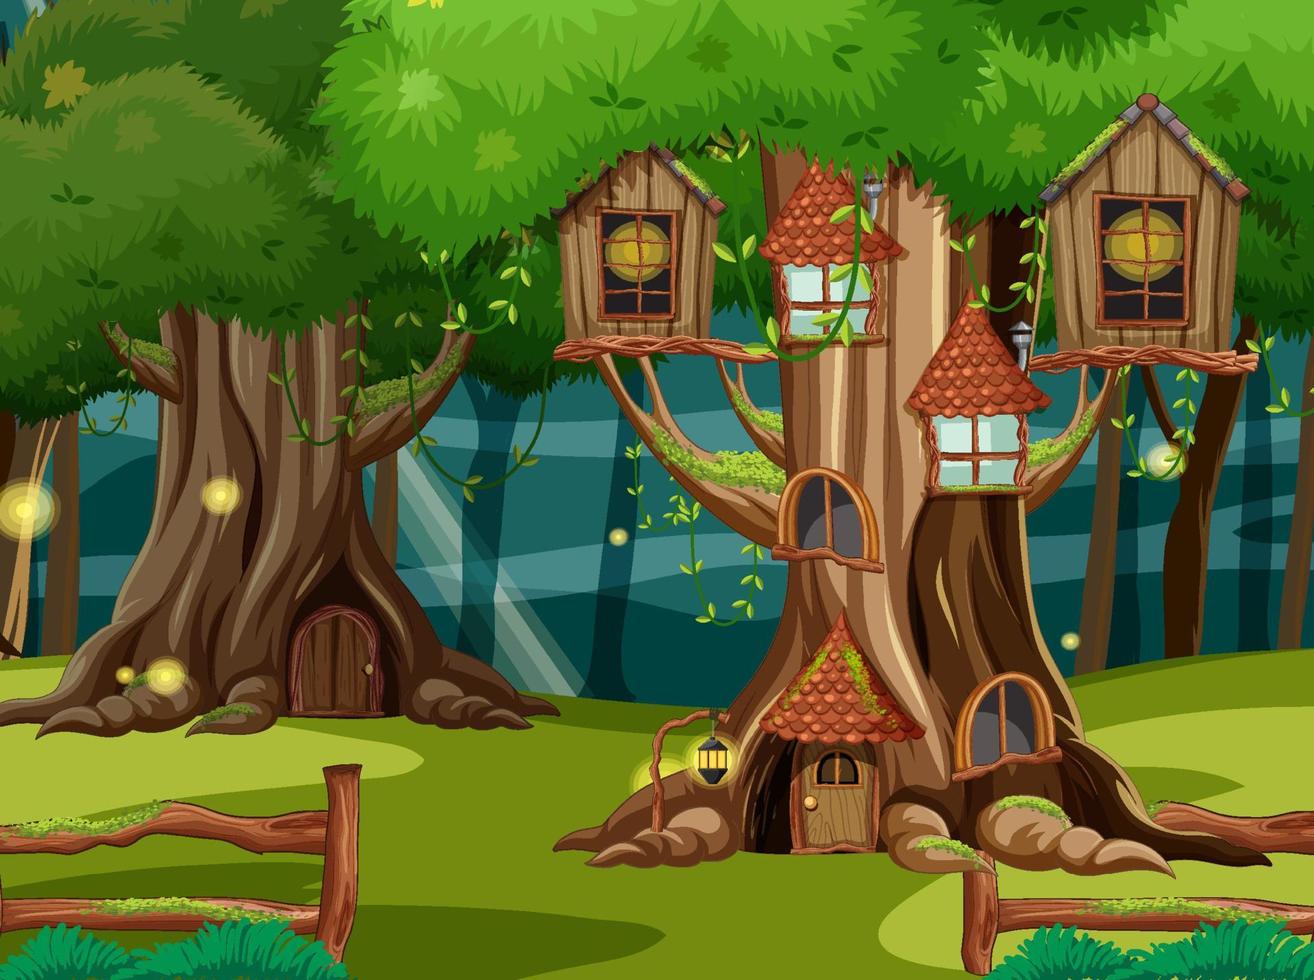 Fantasy forest scene with tree houses vector